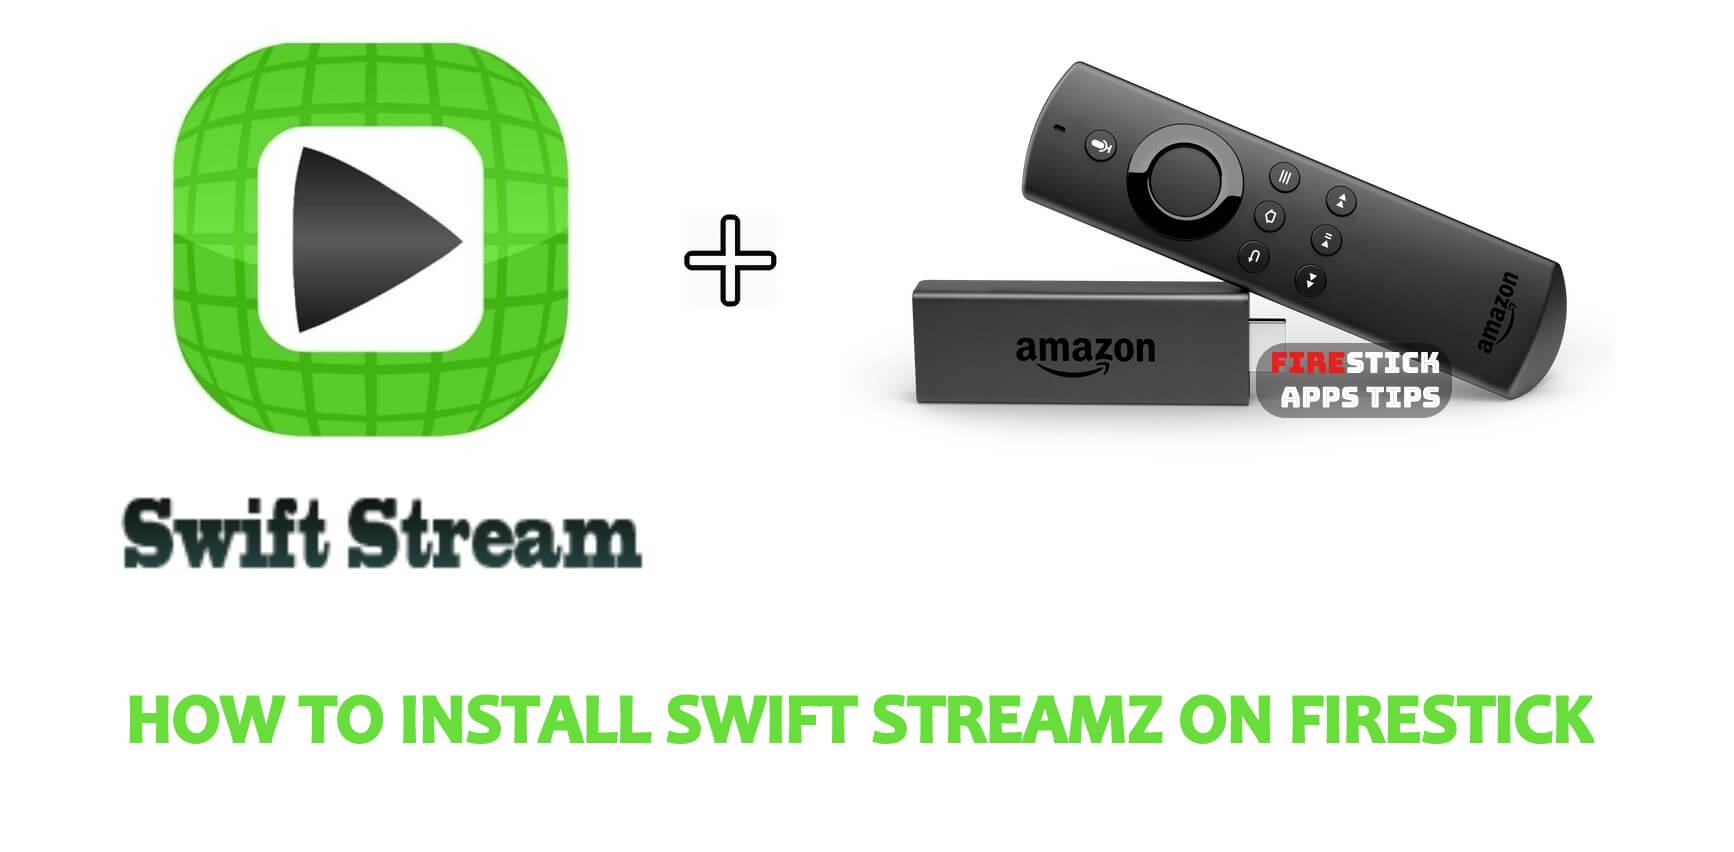 How to Download & Install Swift Streamz on Firestick